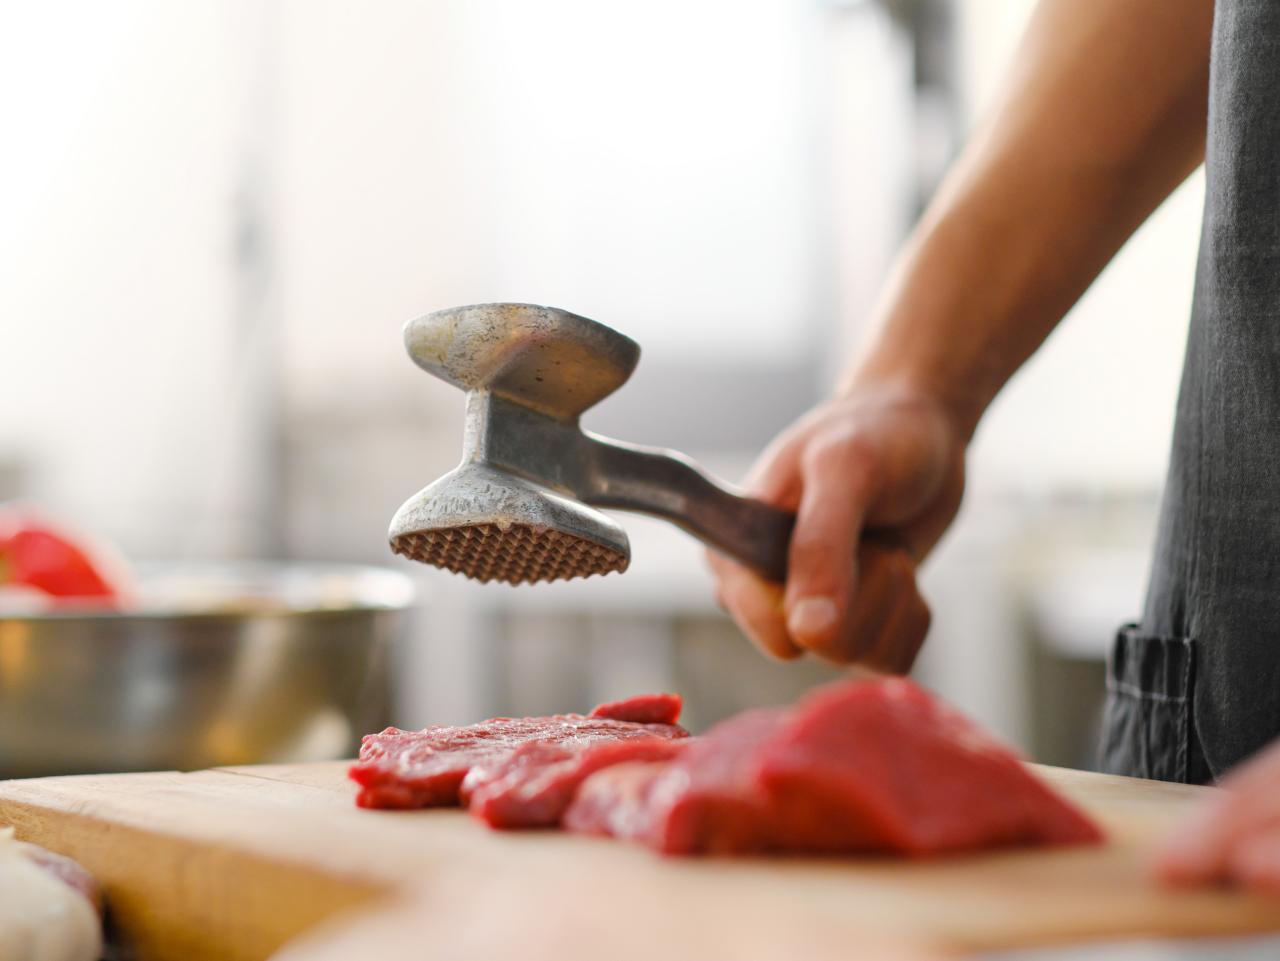 How to Make a Homemade Meat Tenderizer